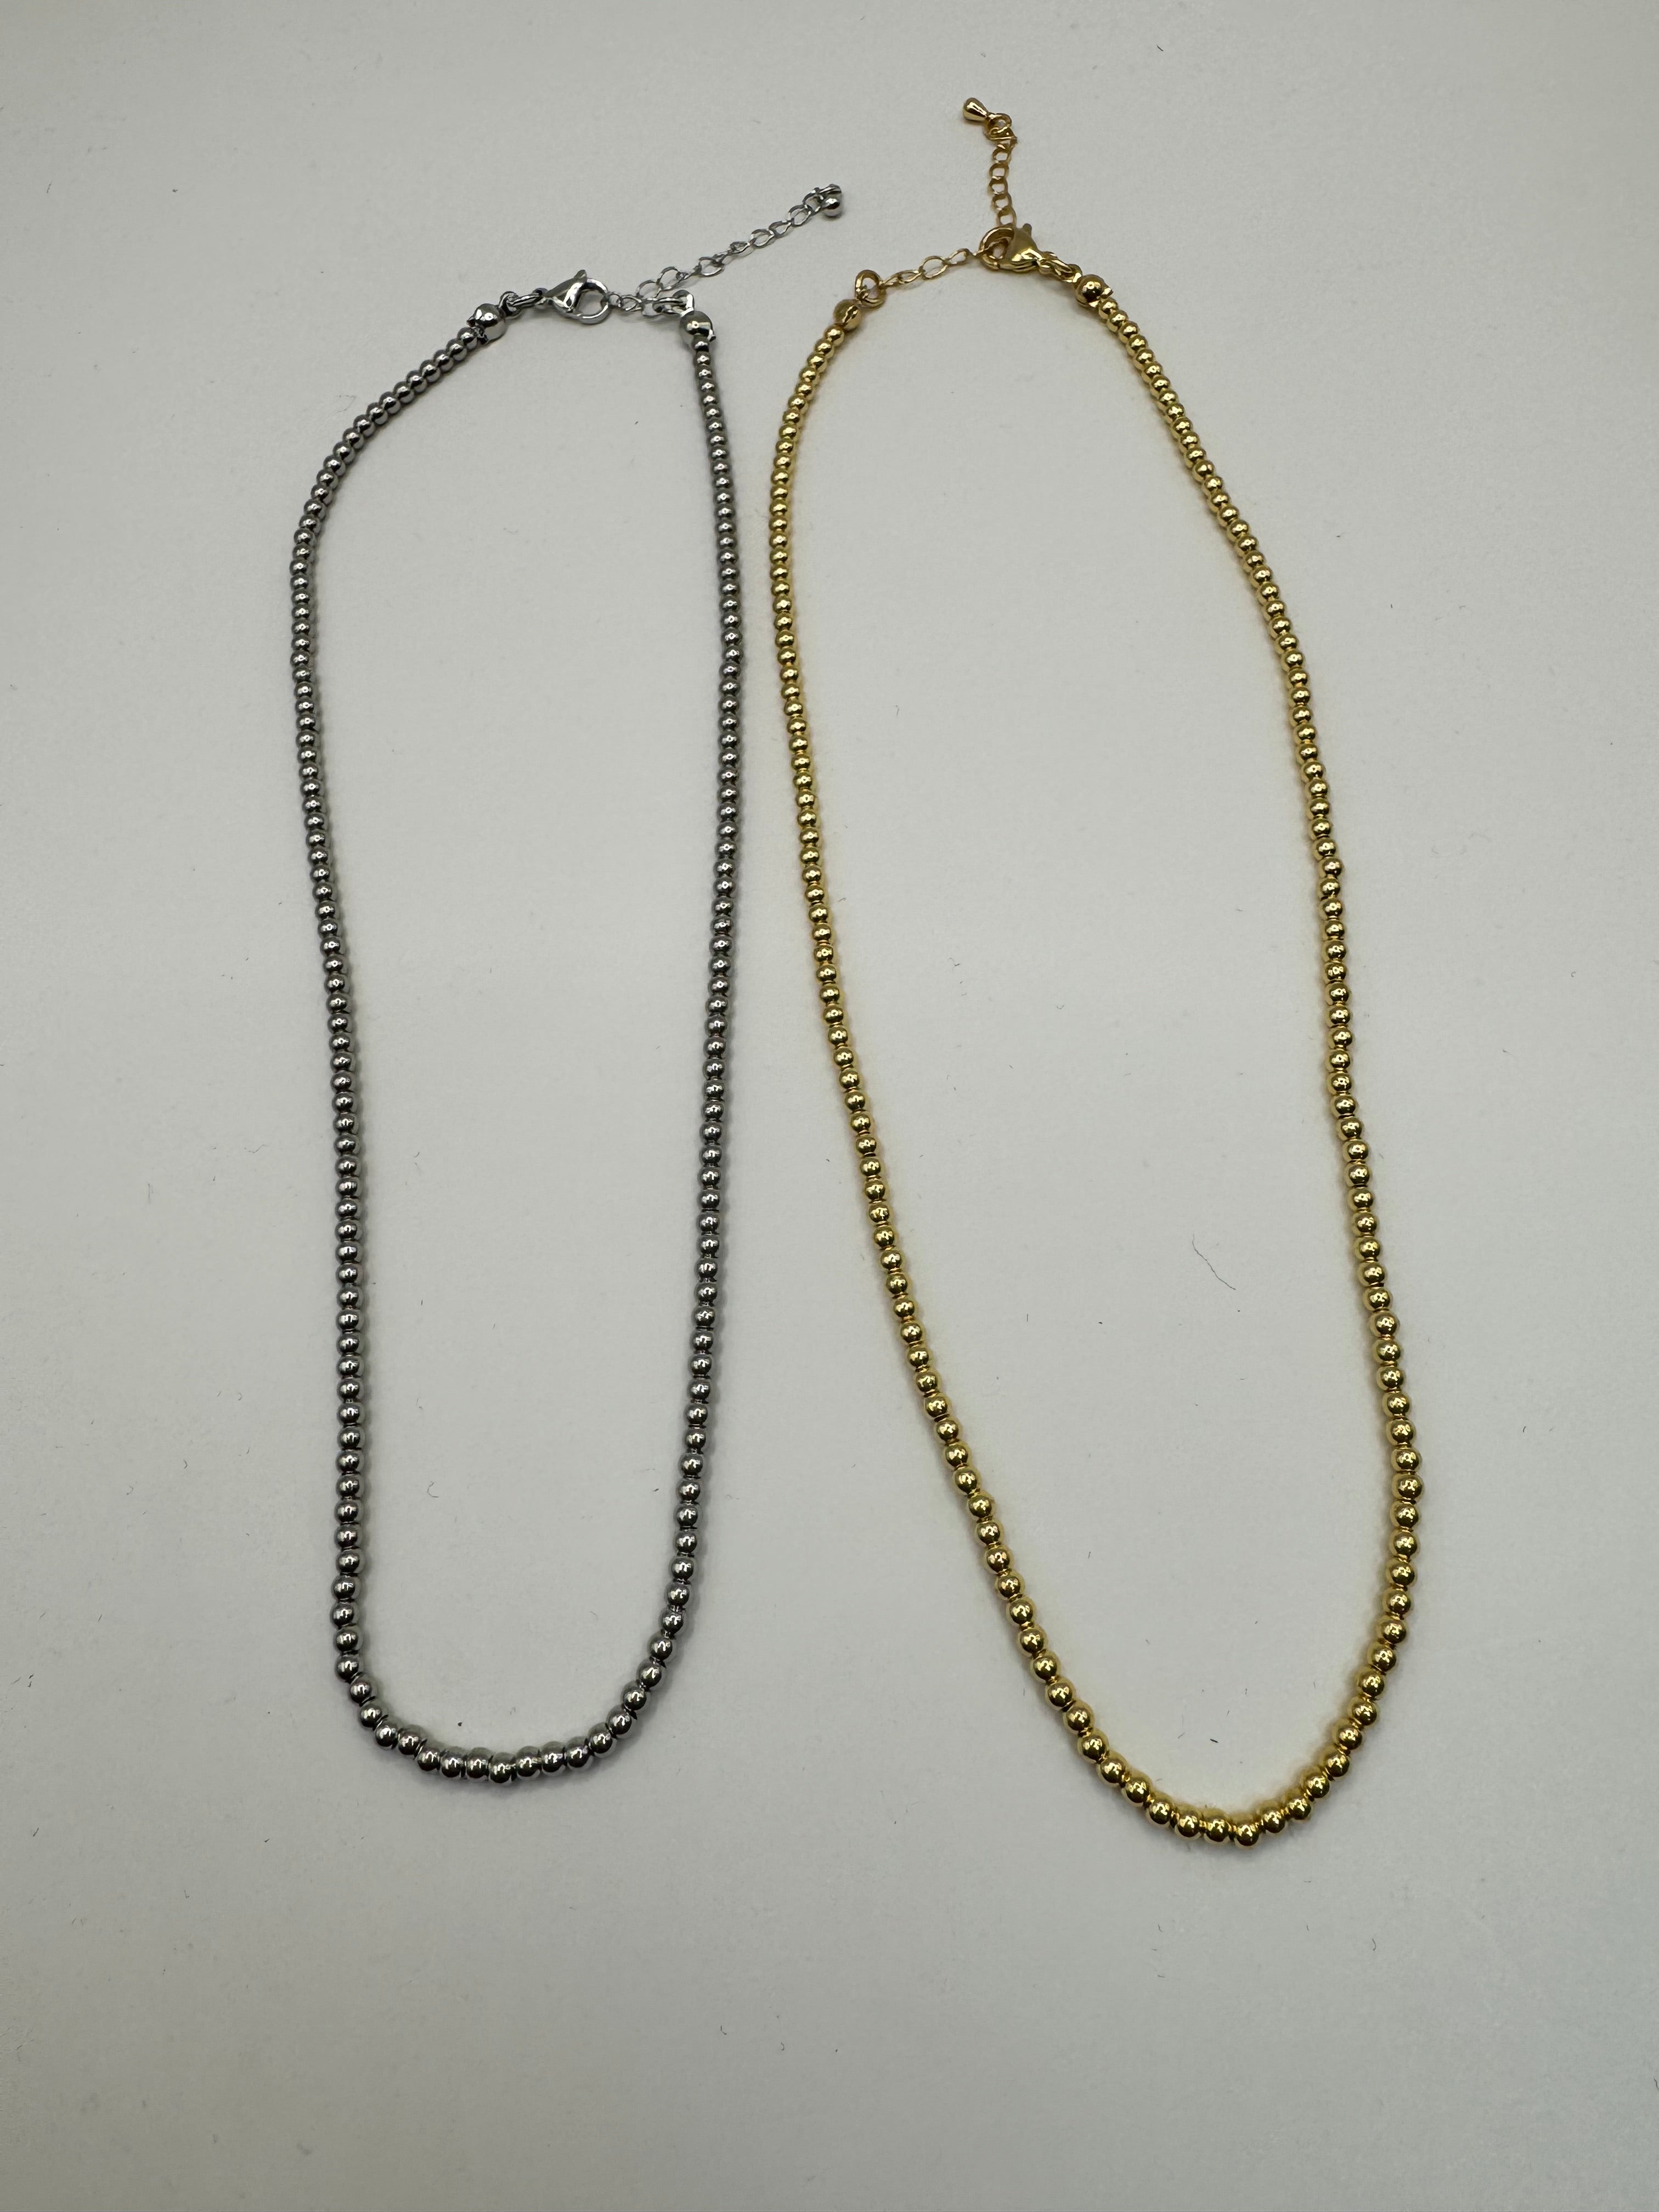 3mm Bead Necklace (Silver and Gold)